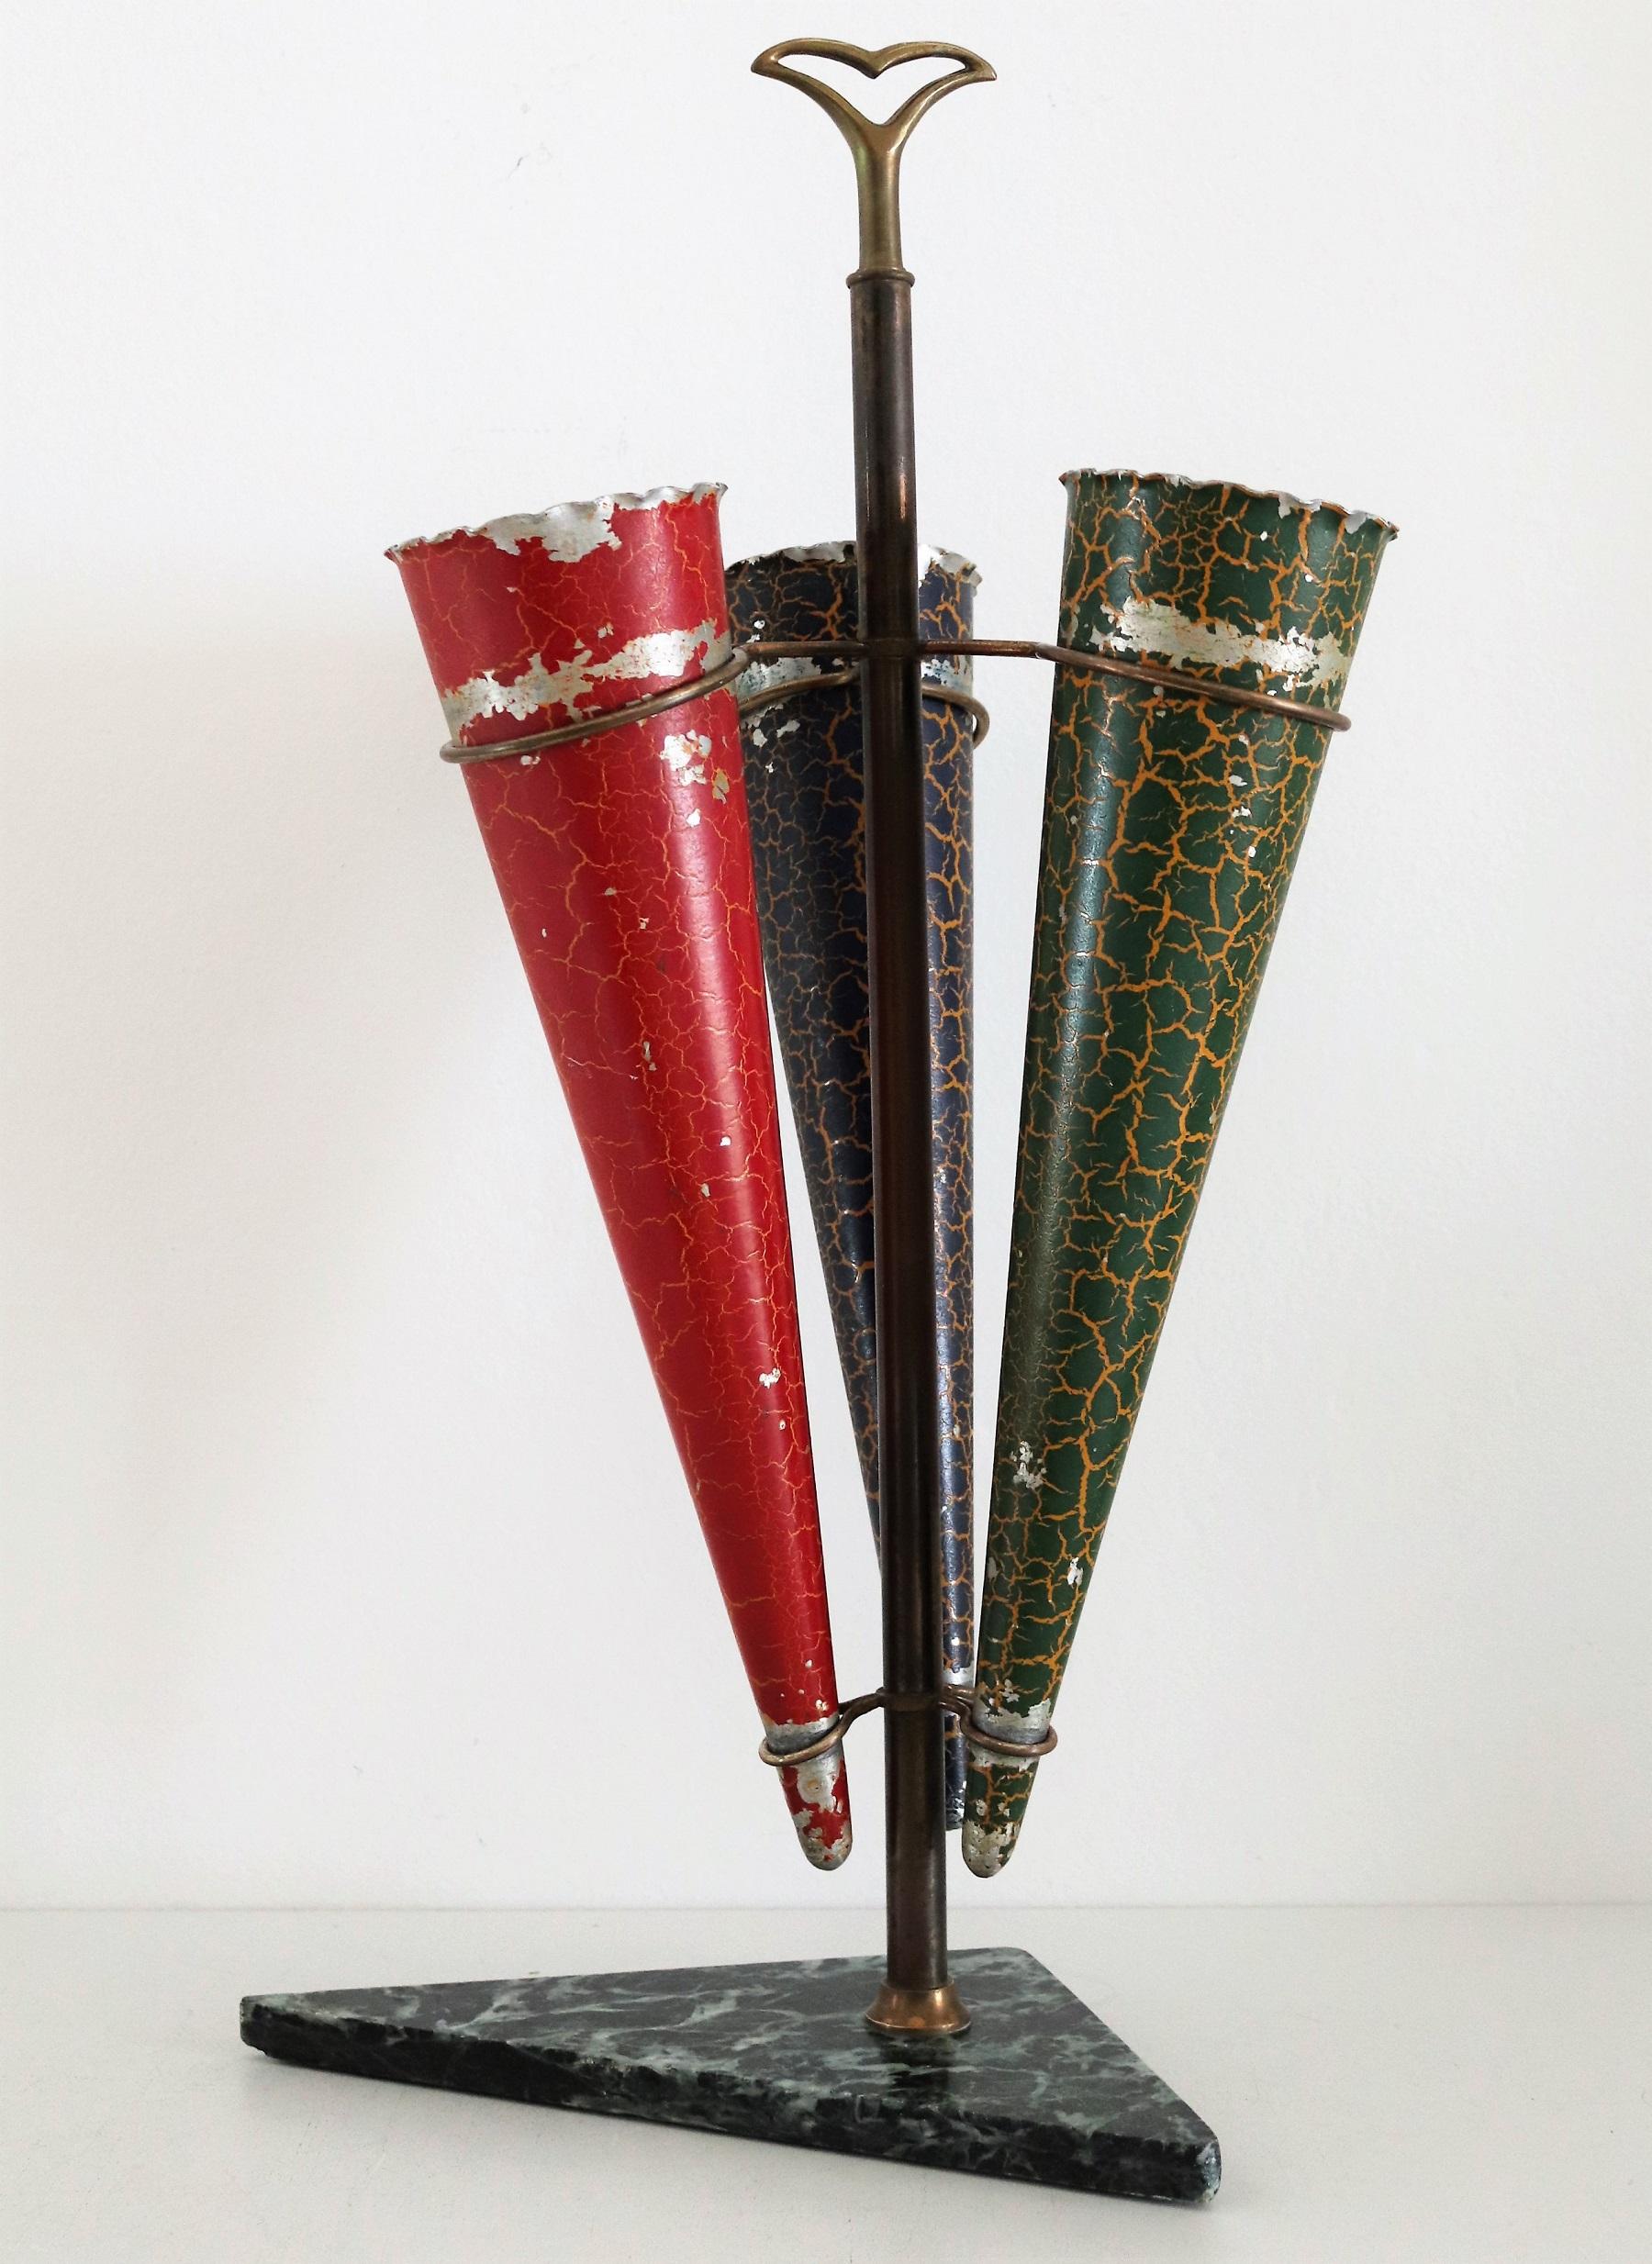 Stunning umbrella stand made in Italy in the 1950s.
The strong brass holder, which got deep dark patina from the time, is fixed on a green alps marble base.
Three movable aluminum bags in red, blue and green are inserted in the brass